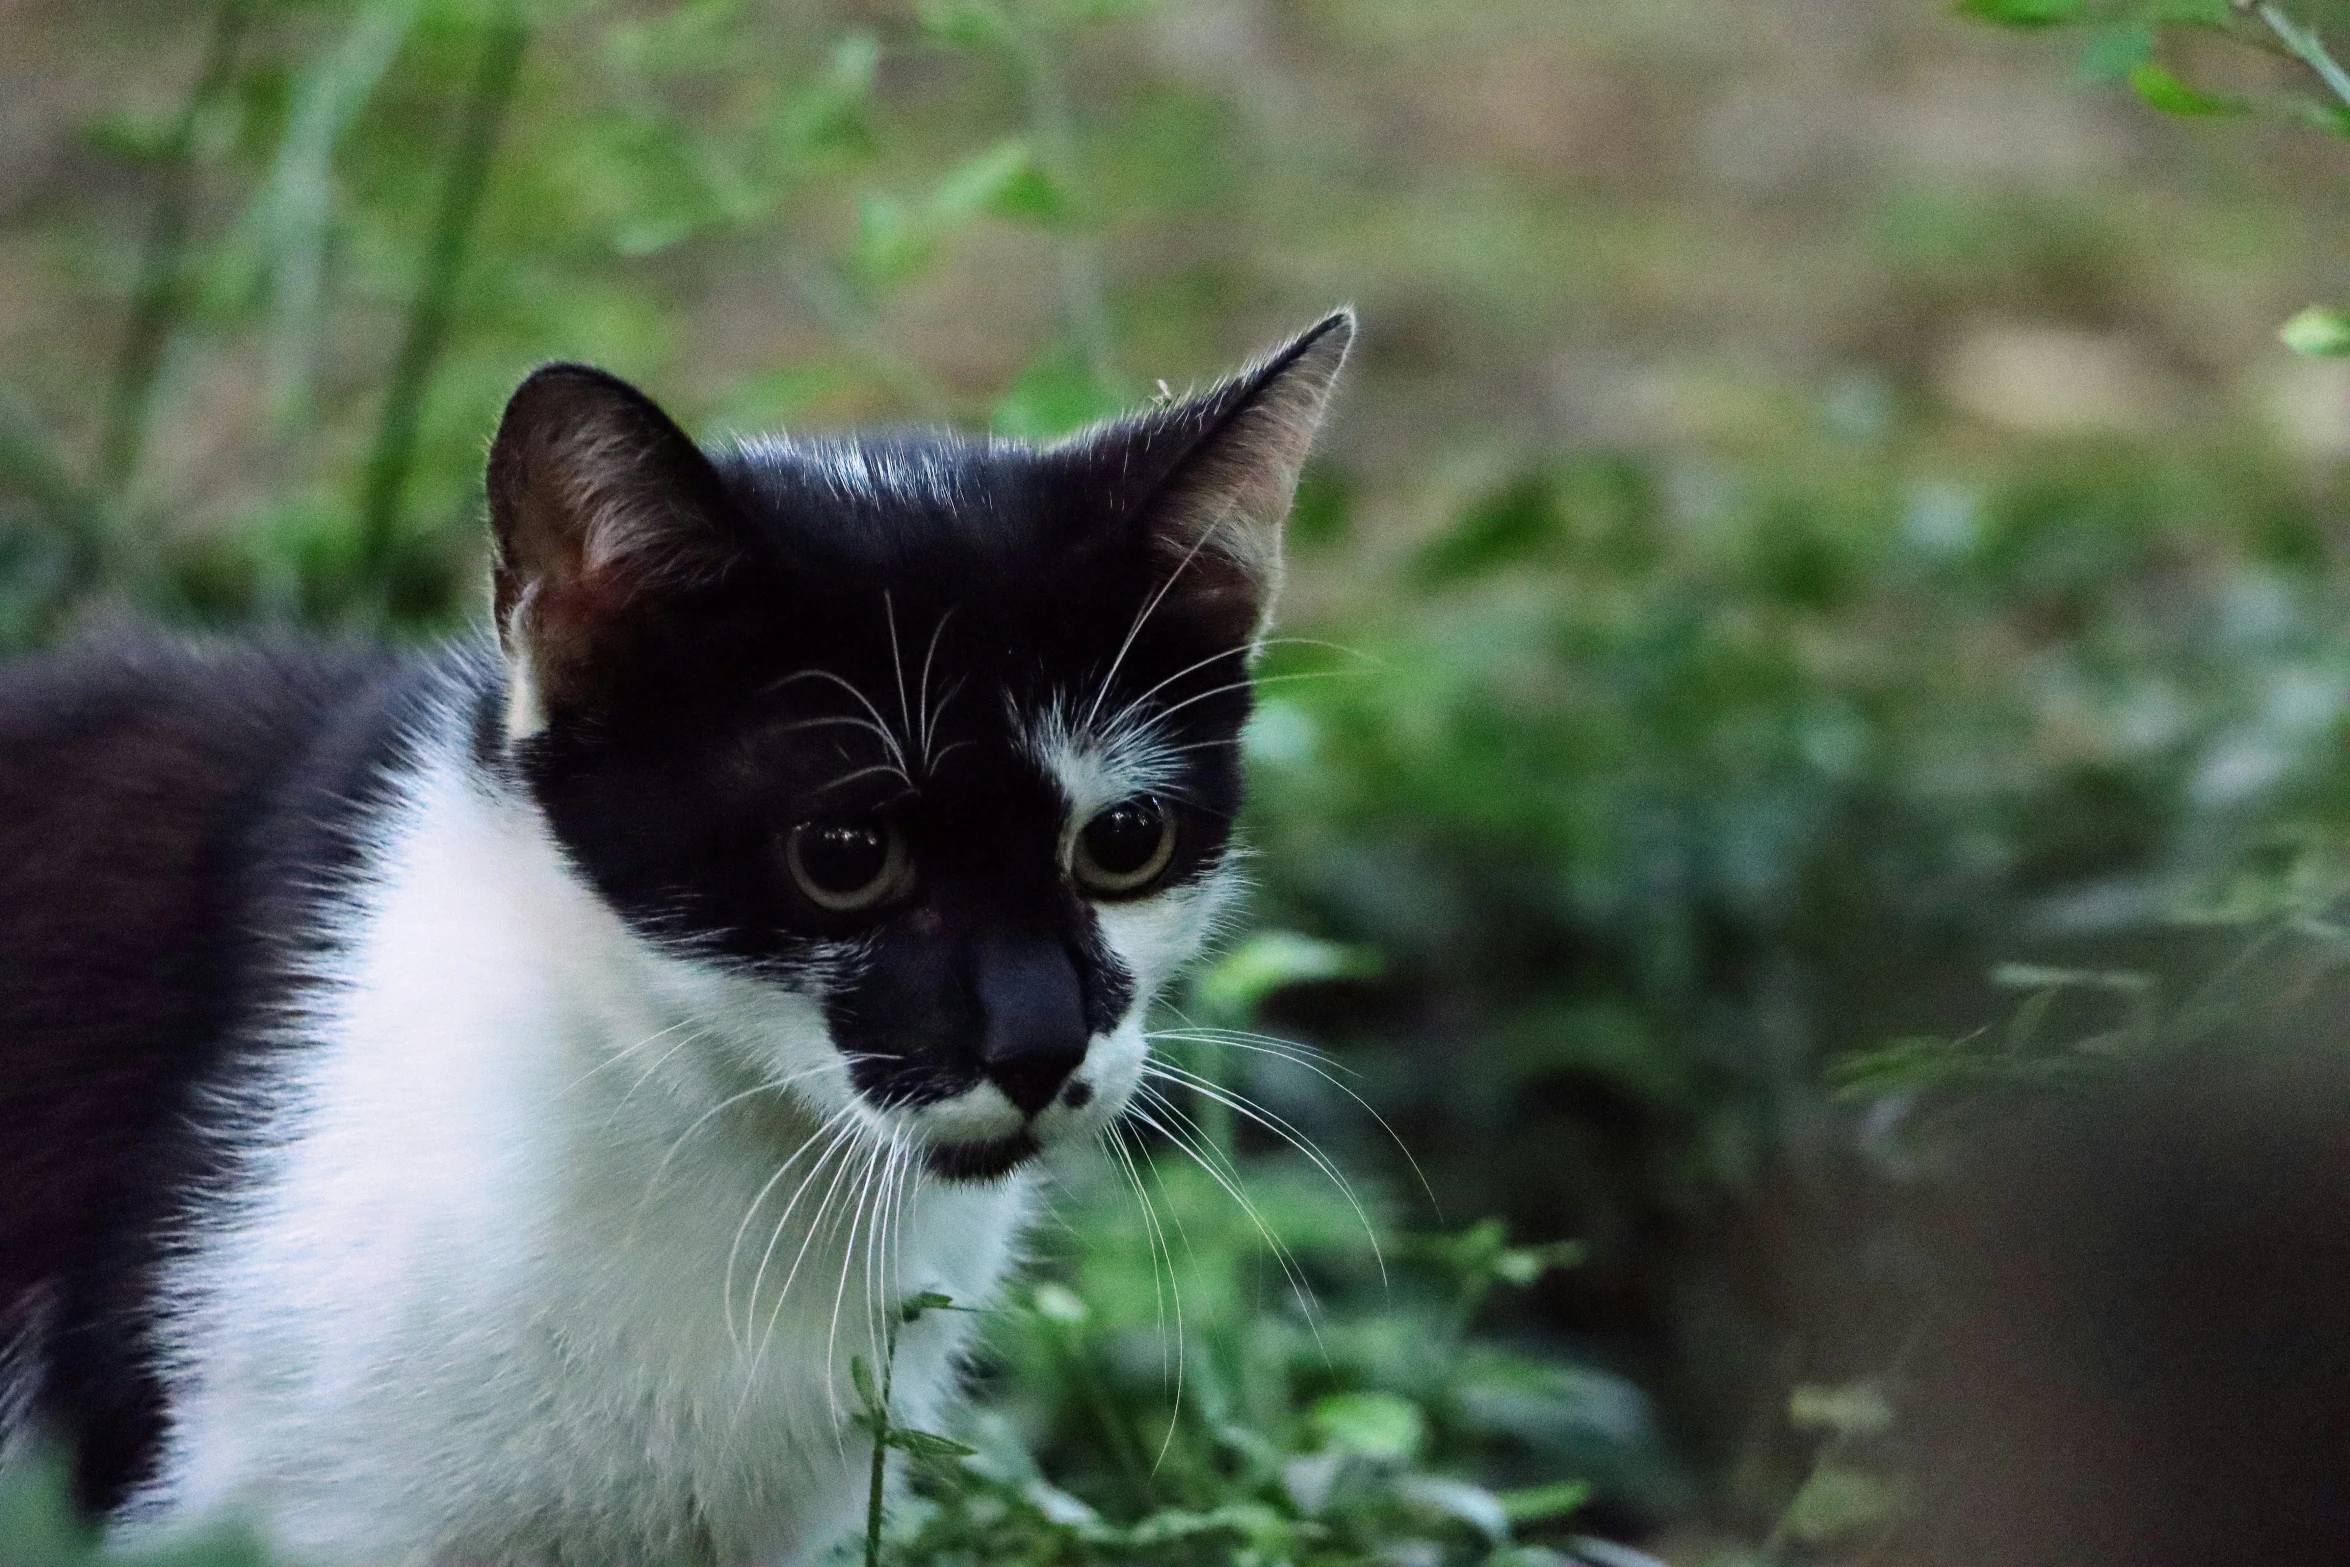 a black and white cat sitting in some bushes